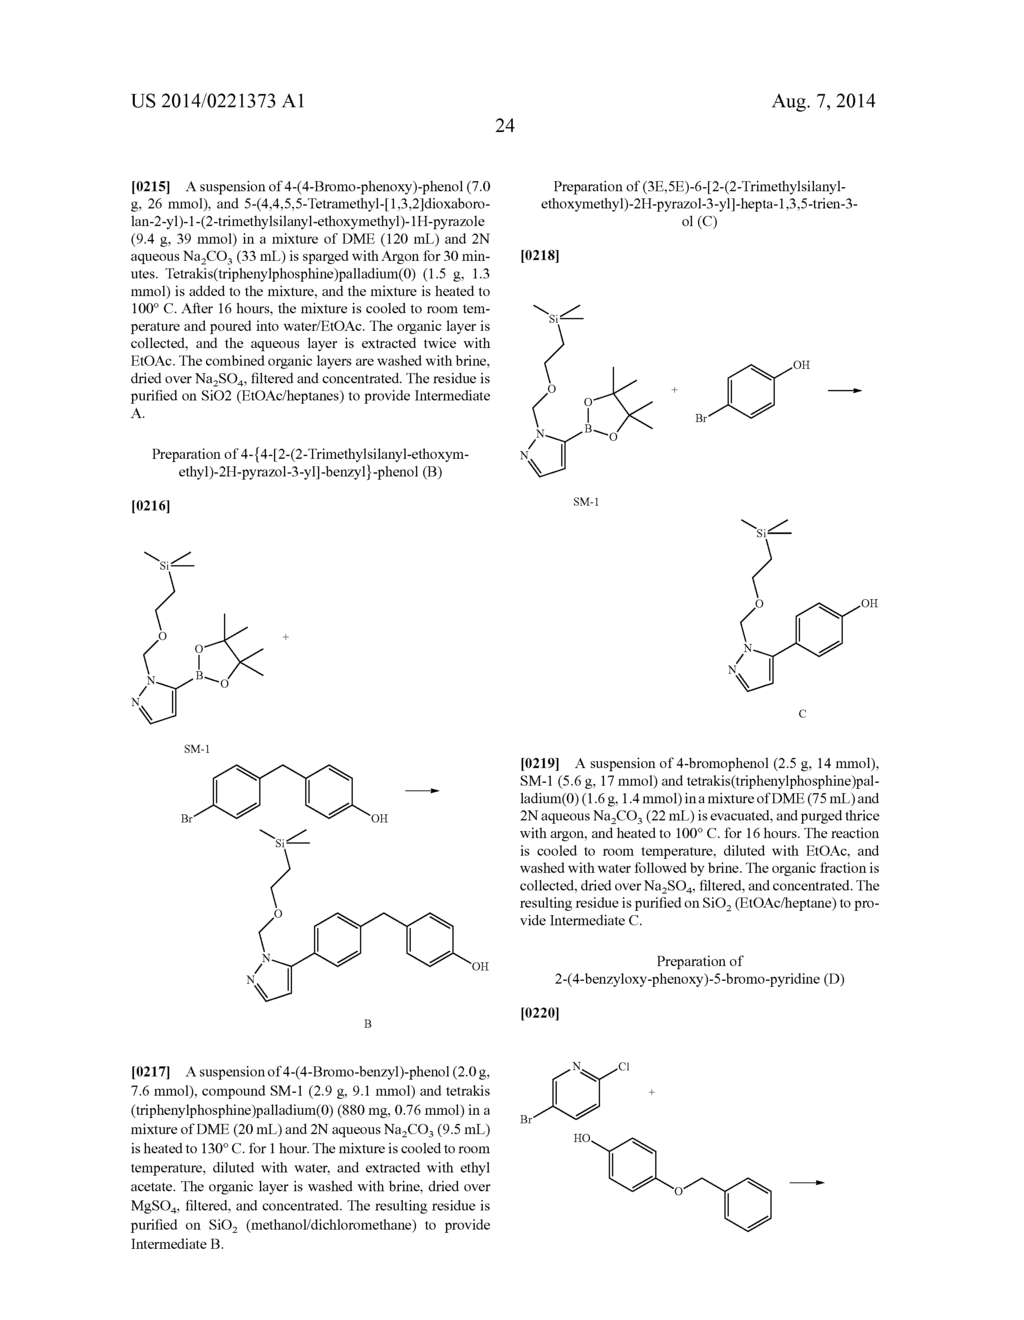 ARYLPYRAZOLE ETHERS AS INHIBITORS OF LEUKOTRIENE A4 HYDROLASE - diagram, schematic, and image 25